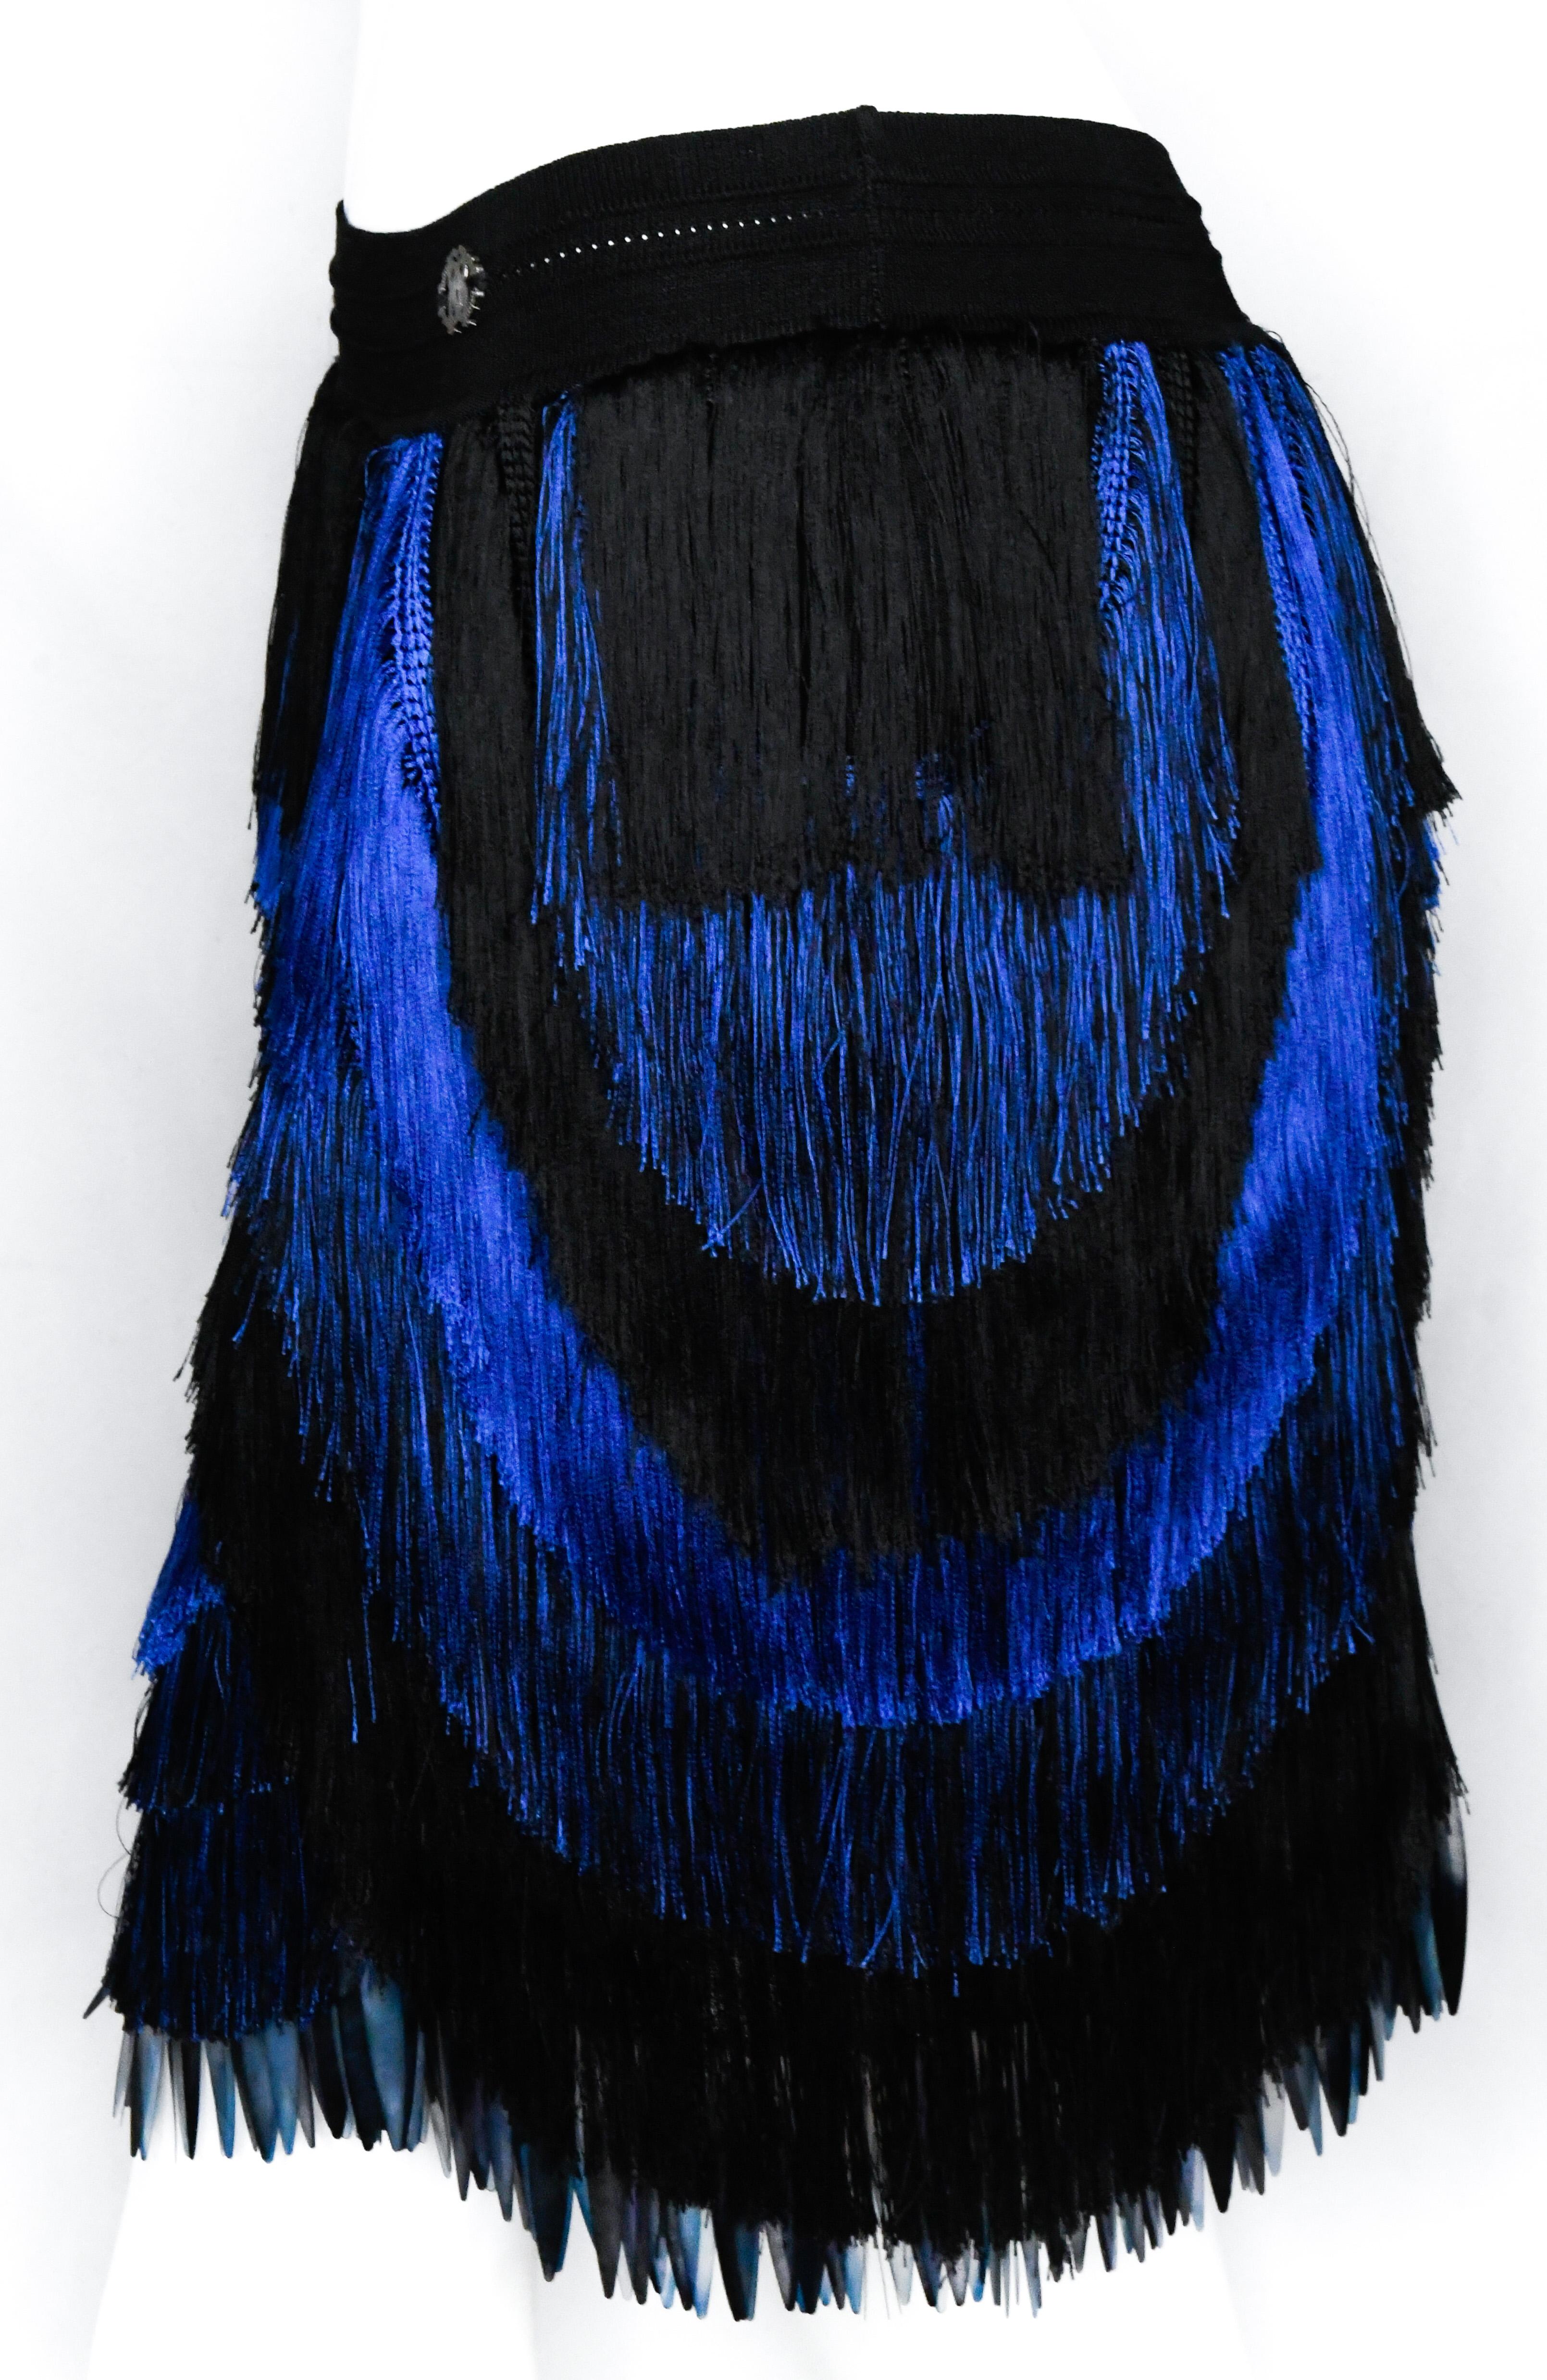 Roberto Cavalli is known for festive and eye-catching pieces.  This skirt is no exception.  Features stretch material, scalloped electric blue and black tiered fringe all over, and banded waist.  The finishing touch?  Entire hem is decorated by